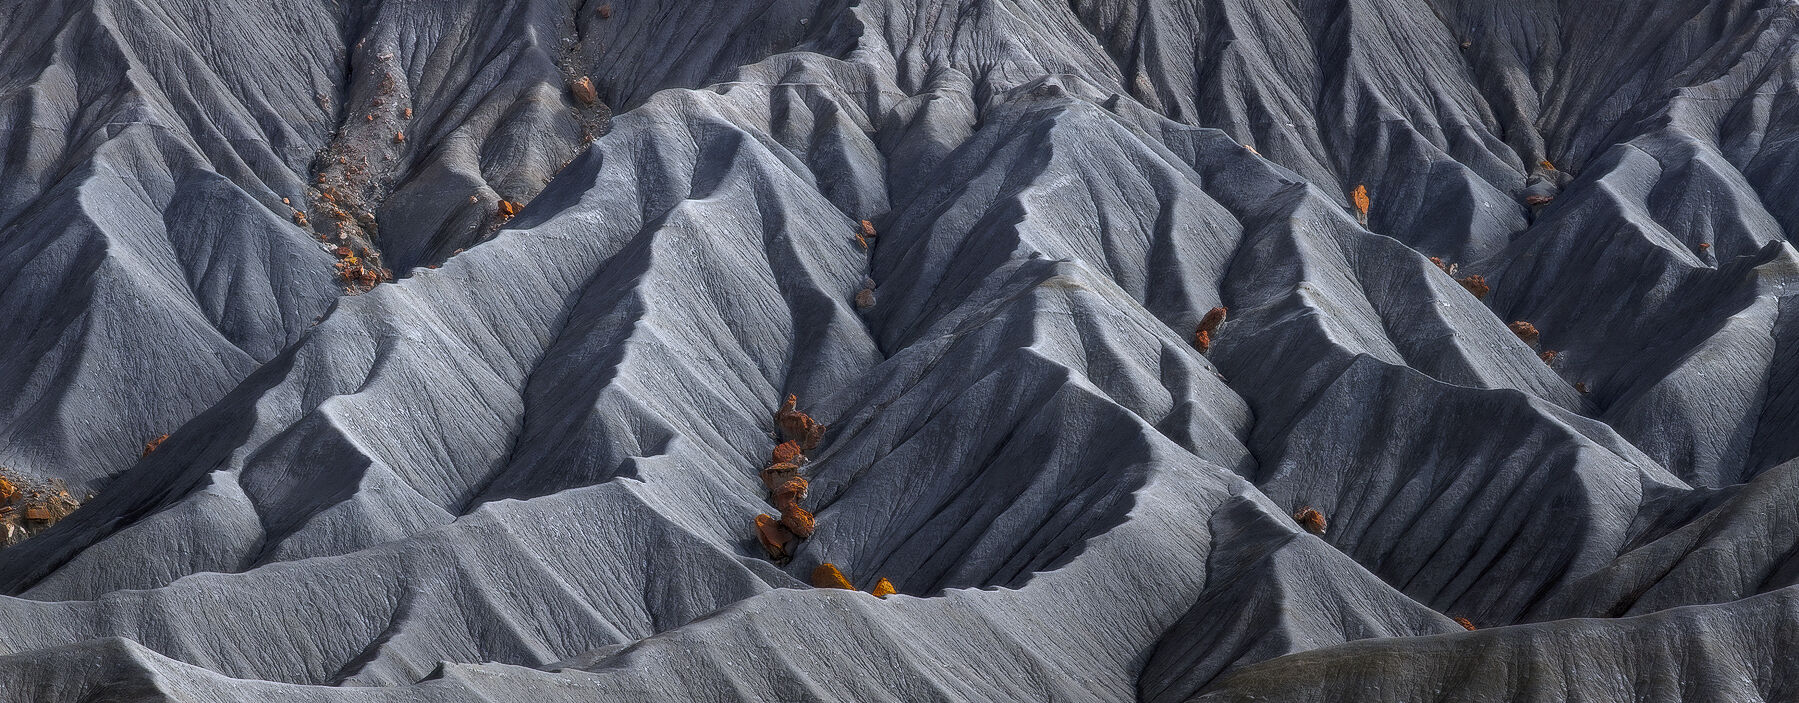 Shale rock formations have highlights bronze deposits cradled within the peaks and ridges which are viewed up close to create an abstract appearance.